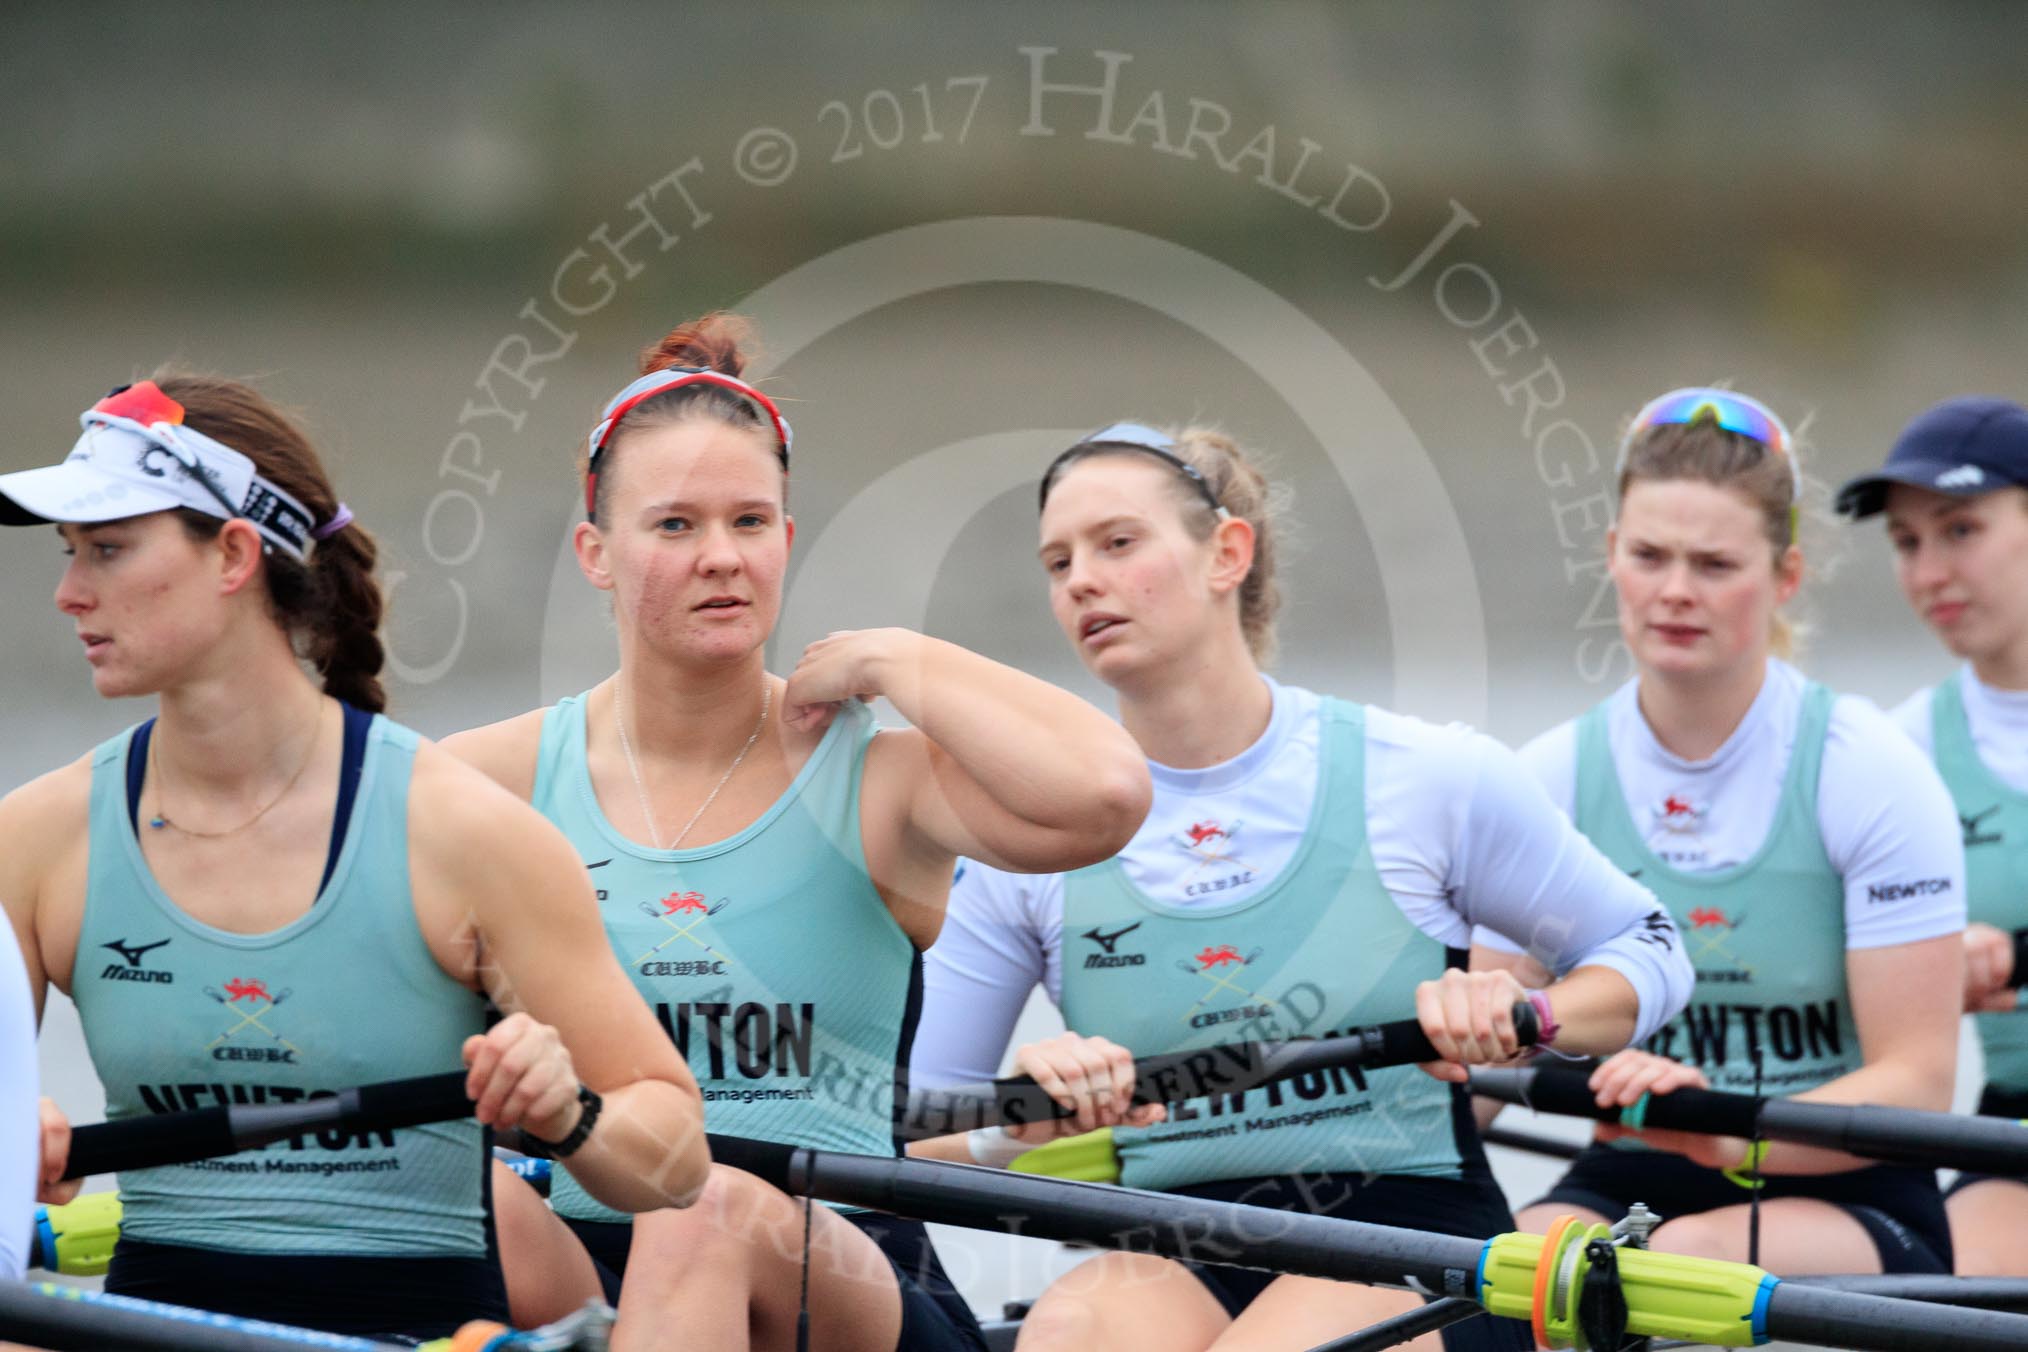 The Boat Race season 2018 - Women's Boat Race Trial Eights (CUWBC, Cambridge): Expecto Patronu, here 6 Thea Zabell, 5 Kelsey Barolak, 4 Laura Foster, 3 Sally O Brien, 2 Millie Perrin.
River Thames between Putney Bridge and Mortlake,
London SW15,

United Kingdom,
on 05 December 2017 at 12:38, image #44